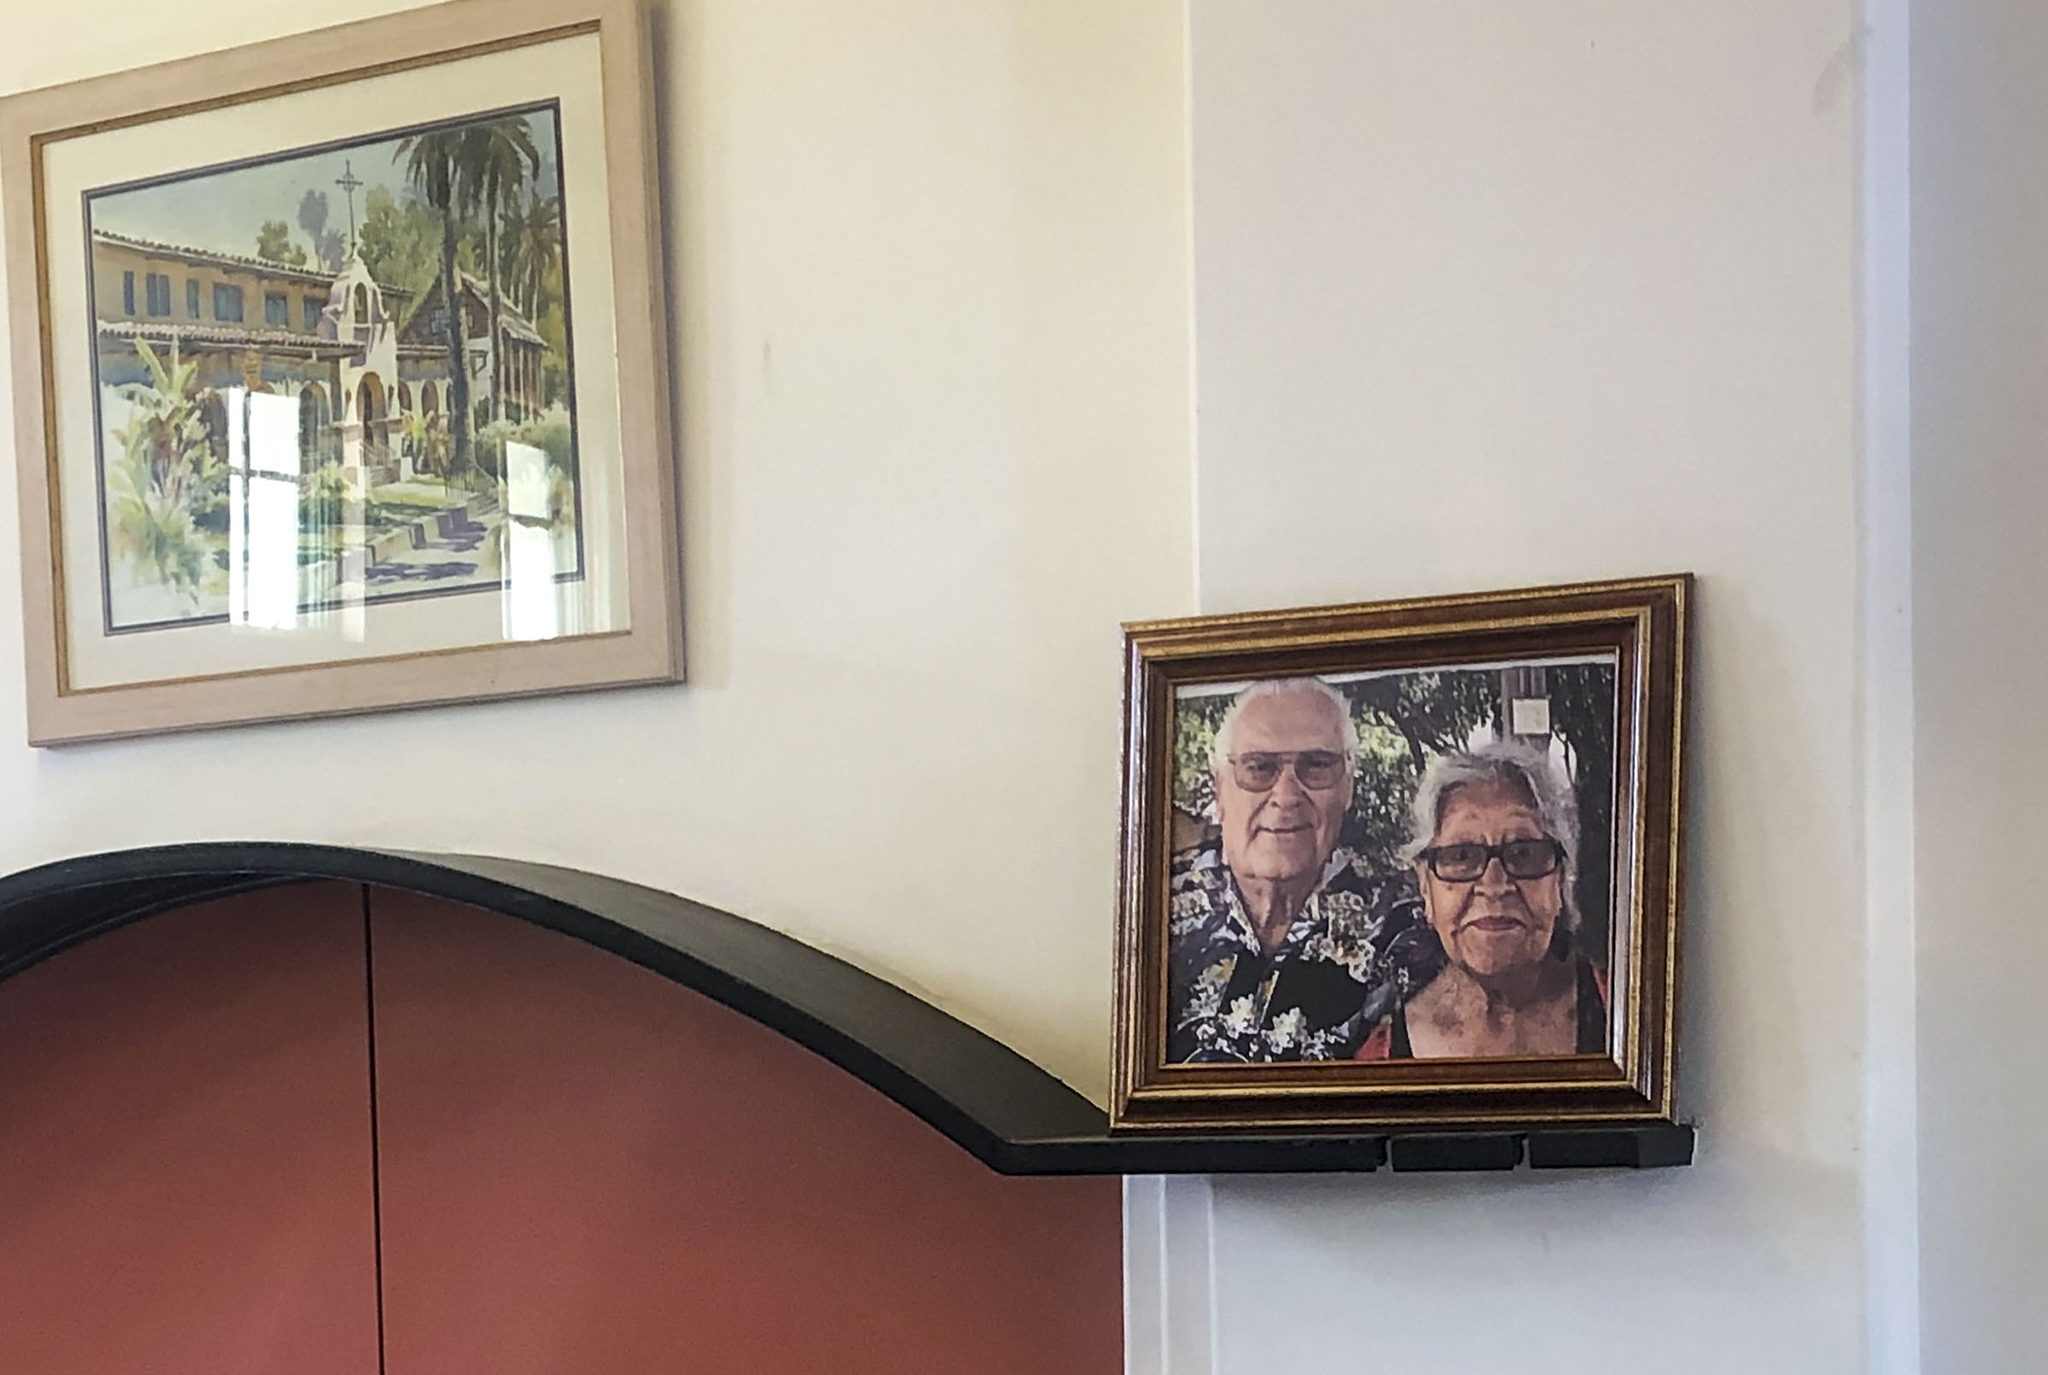 A photo of Ruben Lozano Nava and Lorraine Rose Nava hangs on the wall in the Grapevine Room at the San Gabriel Mission.